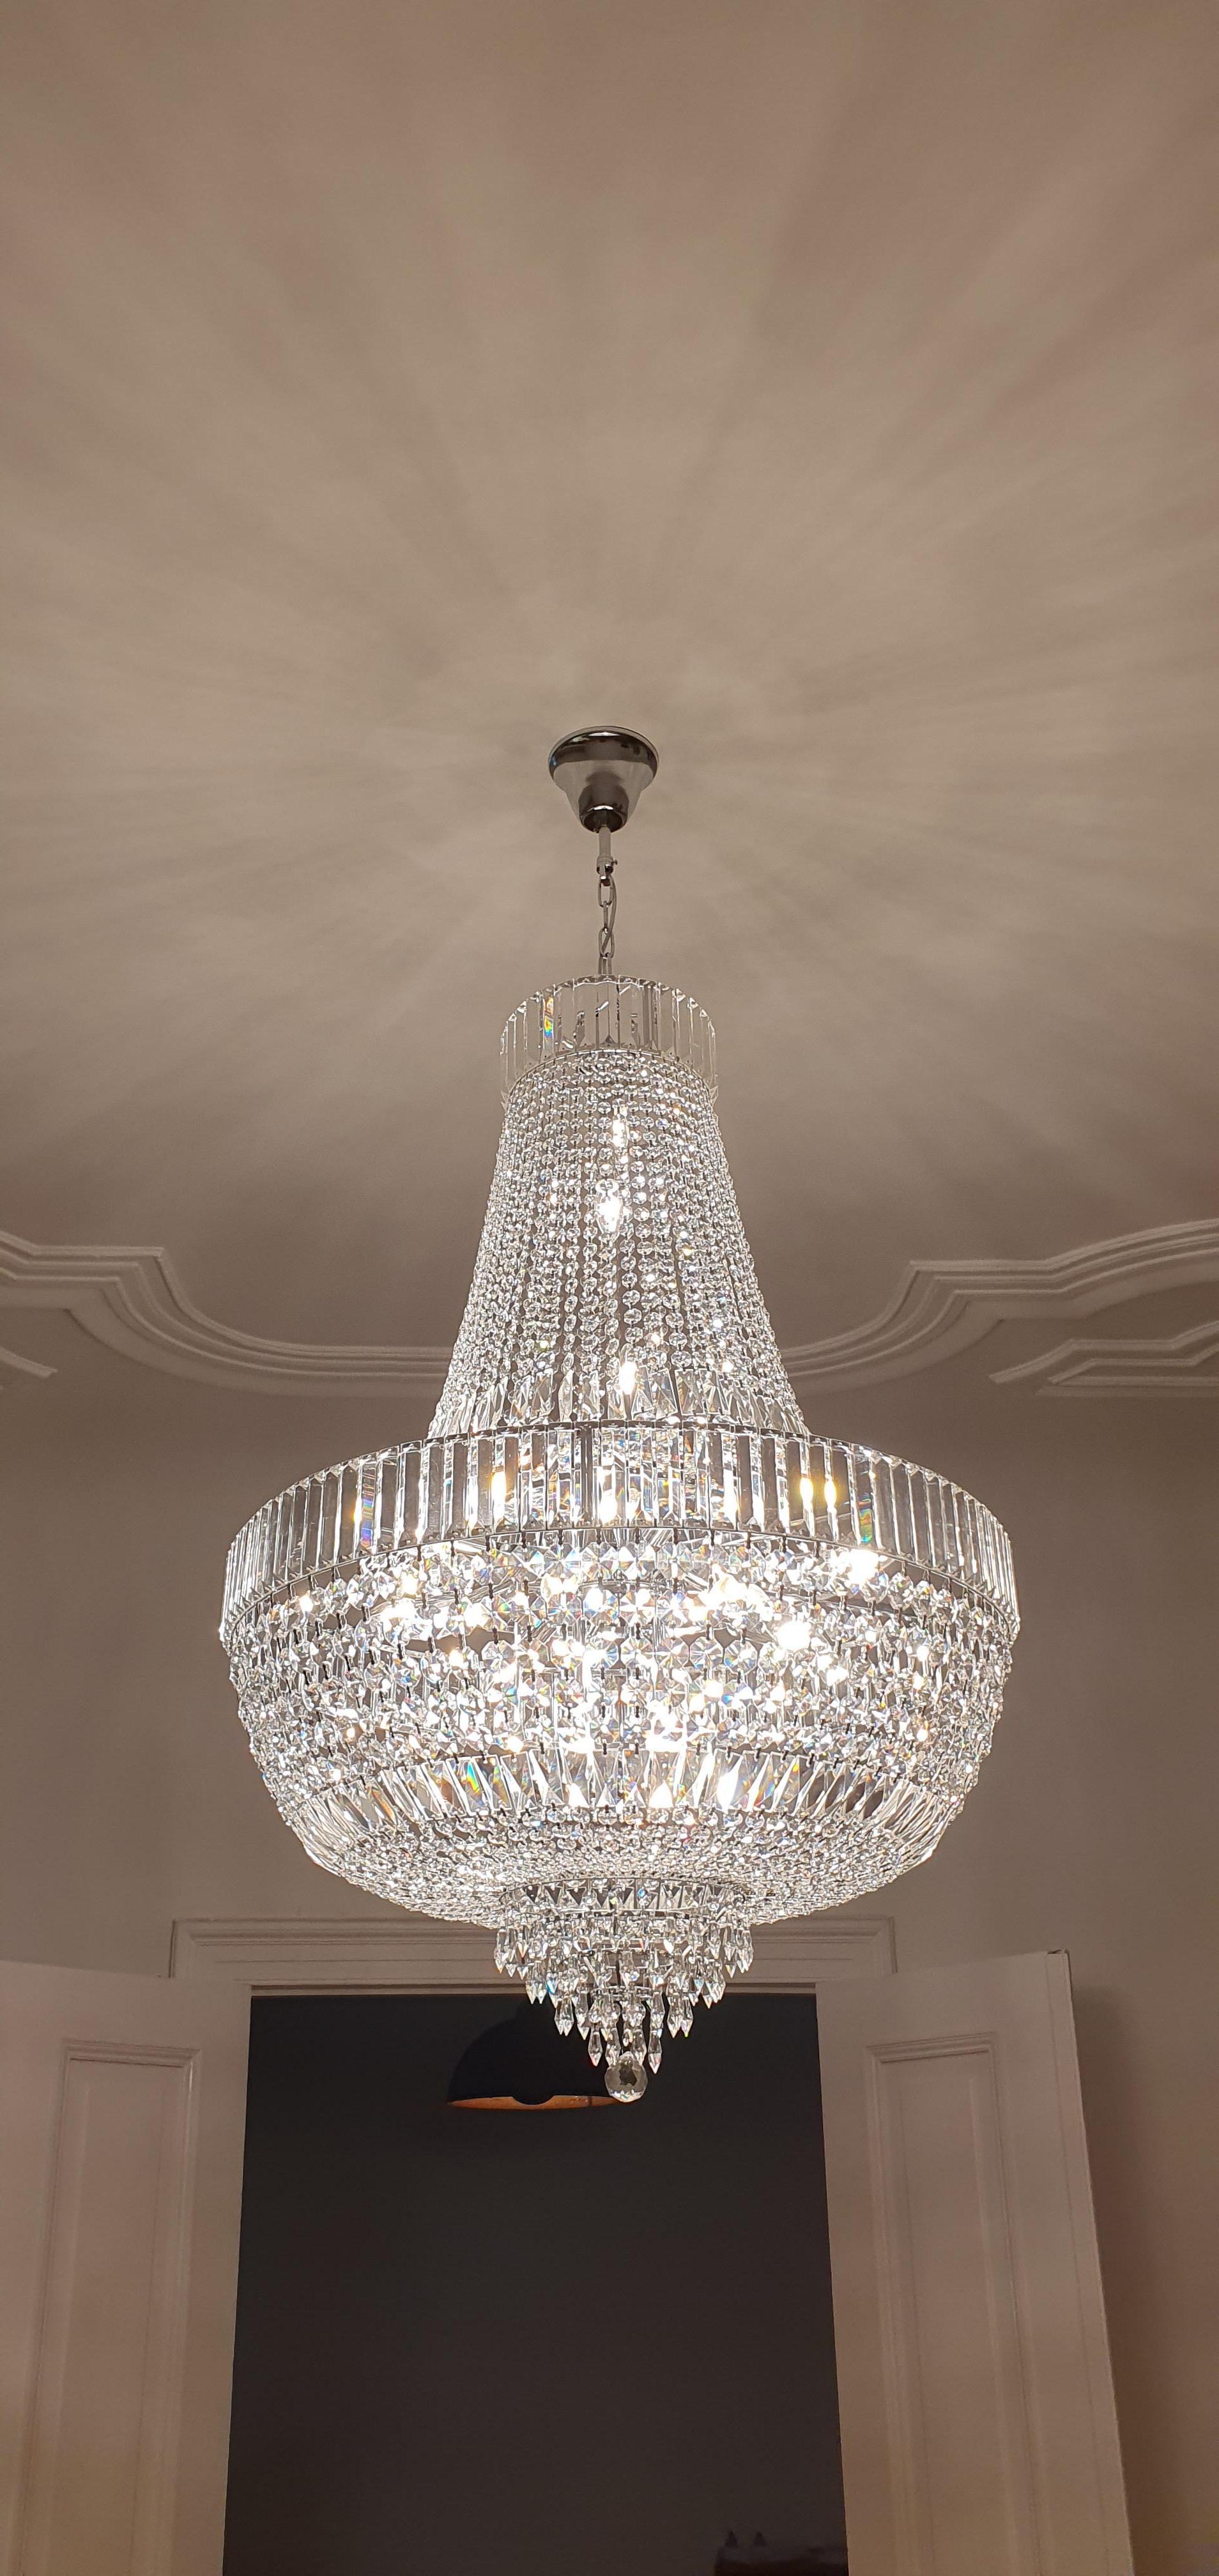 New Art Deco crystal style chandelier Empire style. Asfour crystal.
- House production.
- 55”height x 30”diameter.
- Nickel Plated.
- UL Electrification
- Shipping to: New York.
 